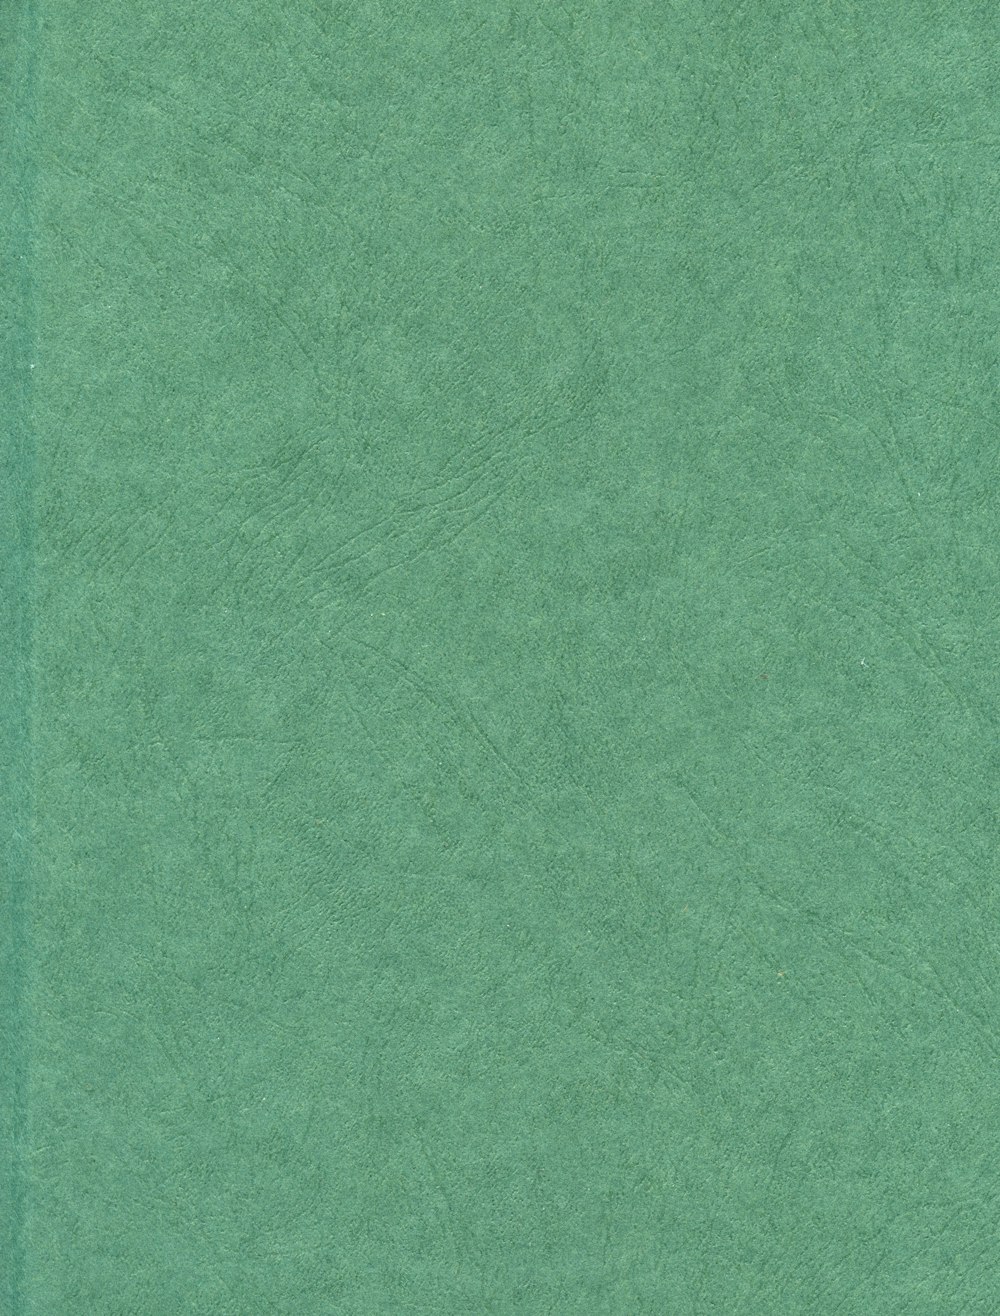 a close up of a green book cover